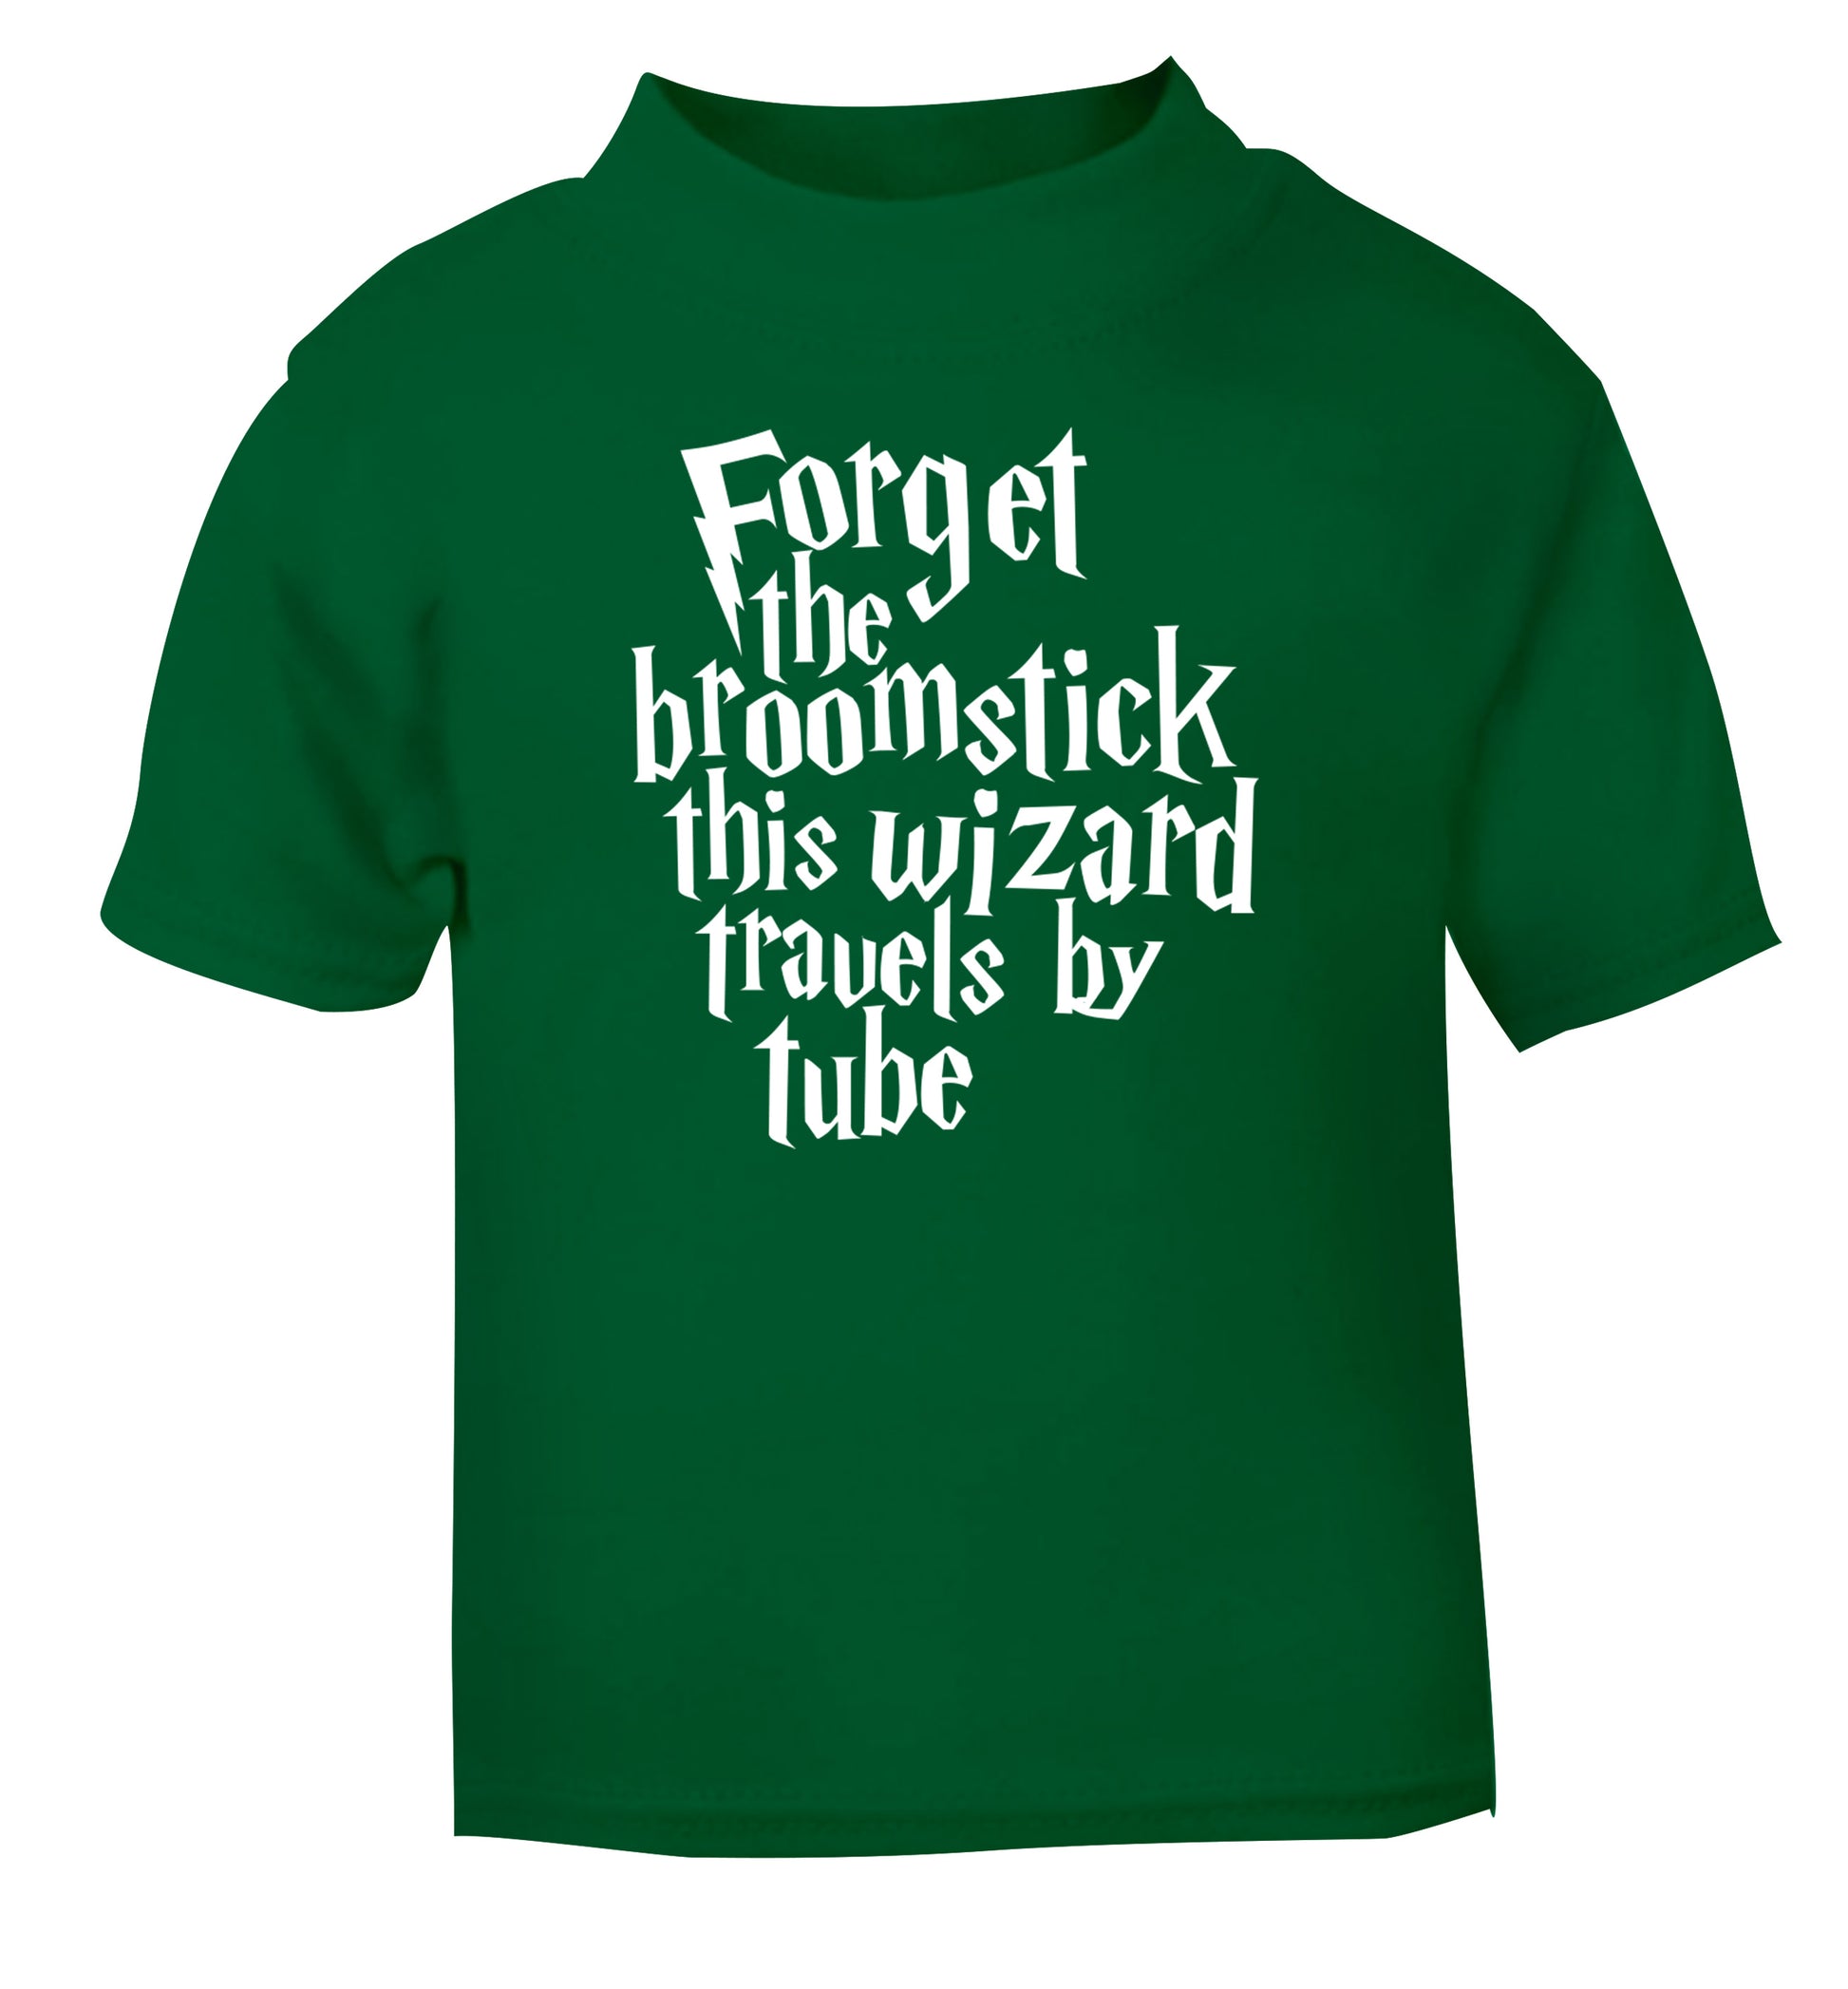 Forget the broomstick this wizard travels by tube green Baby Toddler Tshirt 2 Years